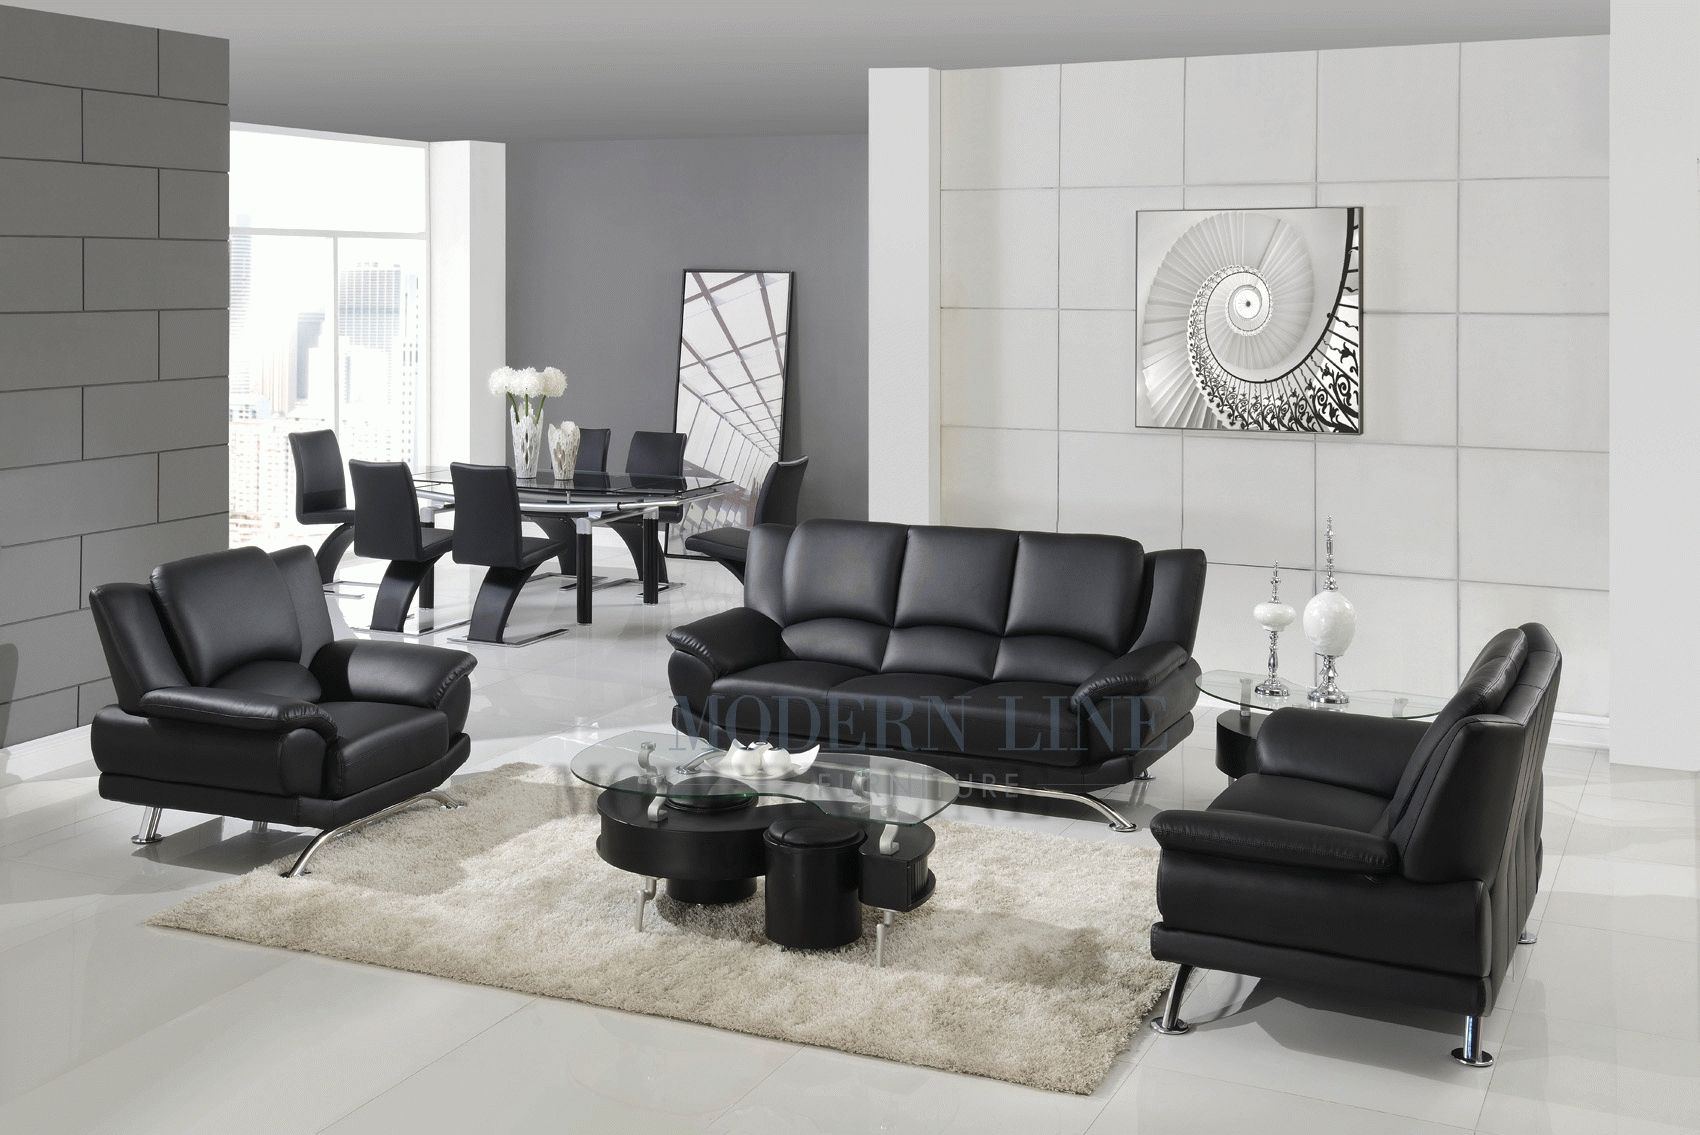 Matching Chairs And Sofas – Thesecretconsul Throughout Commercial Sofas (View 14 of 20)